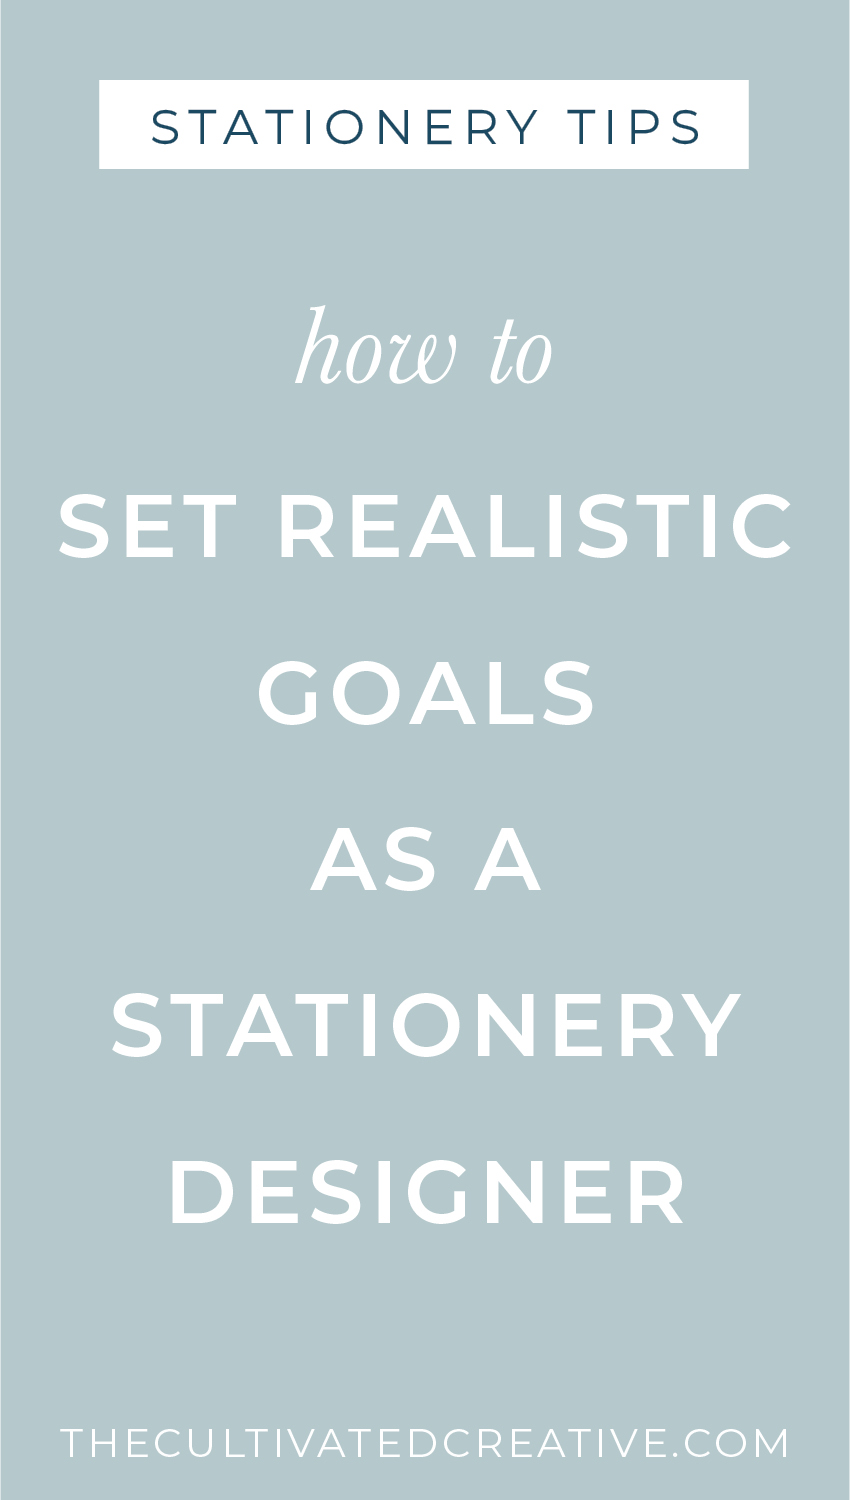 setting realistic goals as a stationer